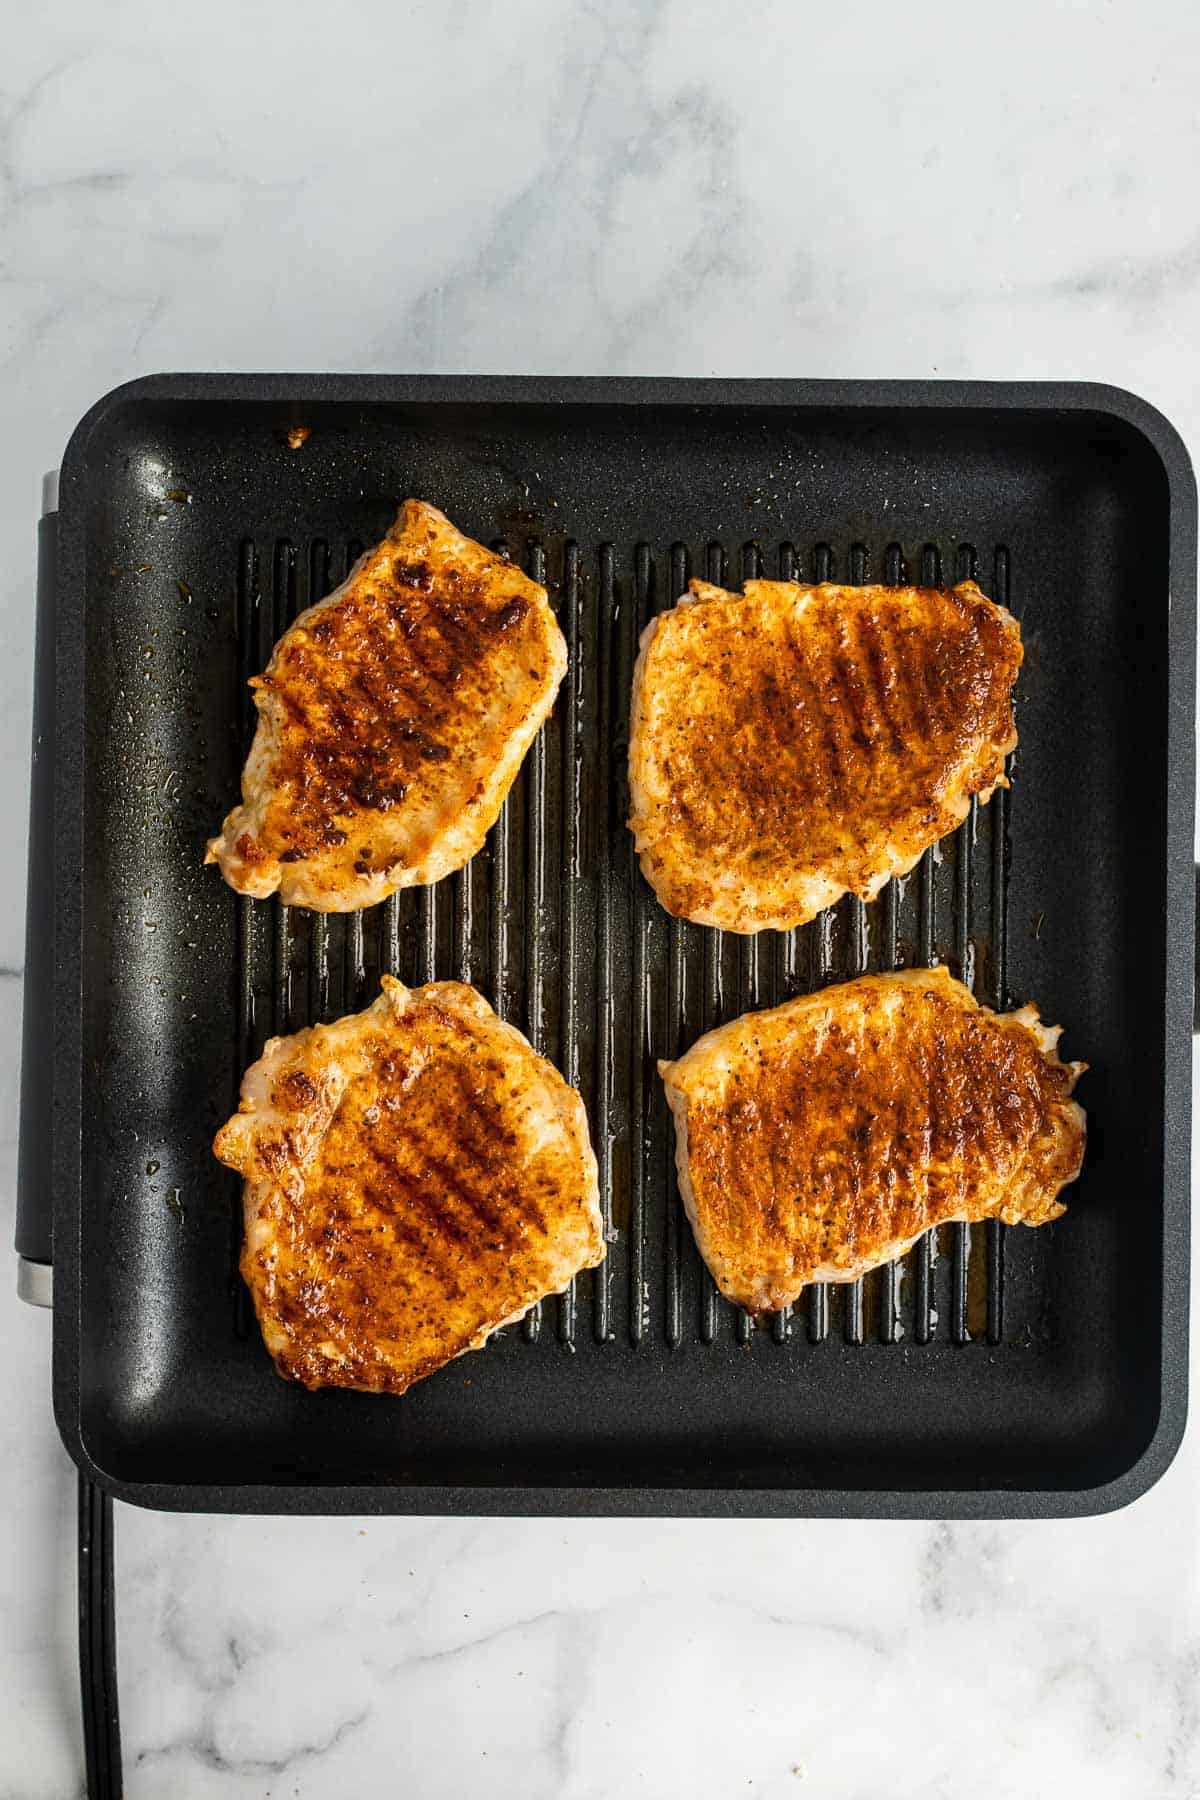 Fully cooked pork chops on a grilling pan